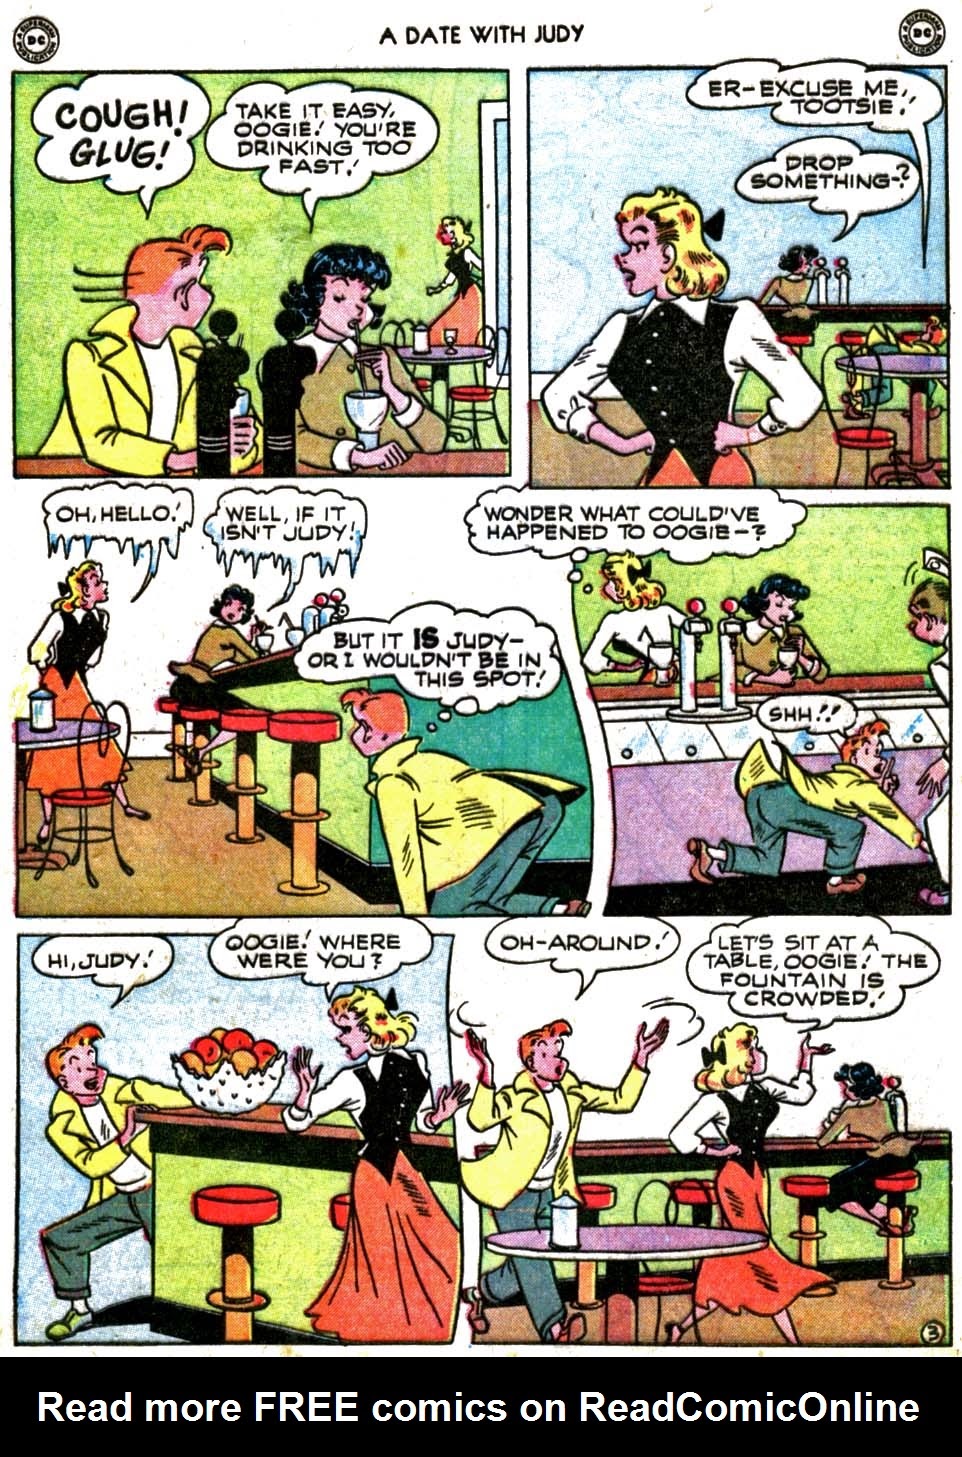 Read online A Date with Judy comic -  Issue #10 - 47